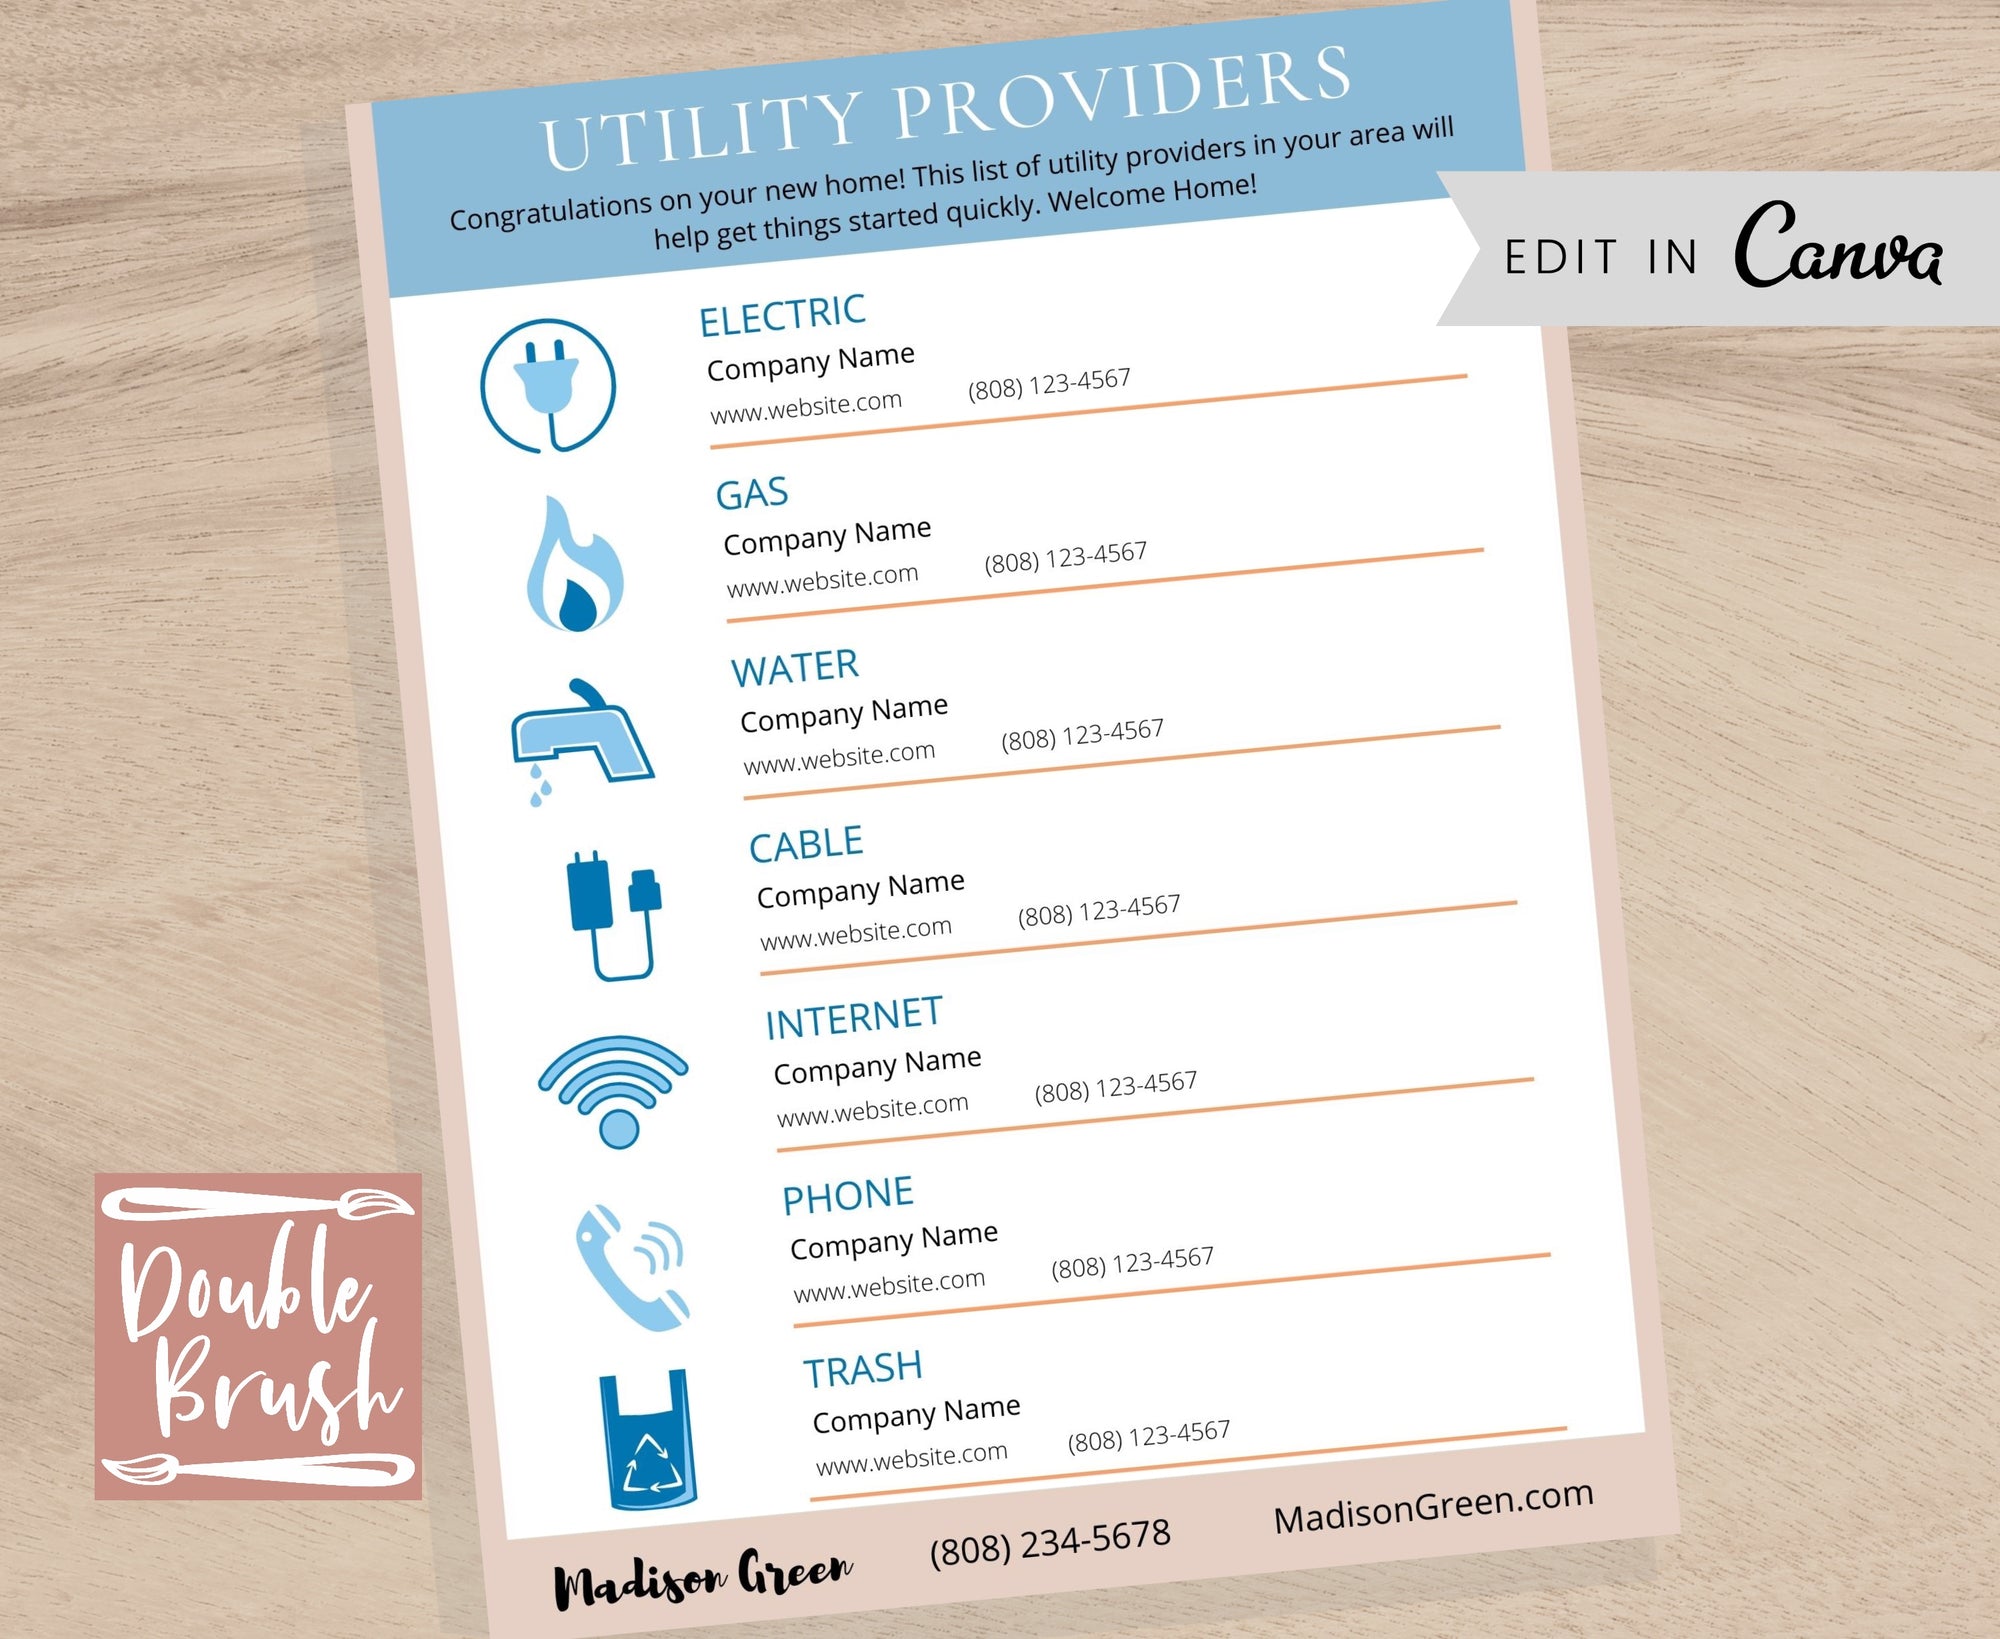 Real Estate Flyer Utility Service Providers List Template, for New Home Buyer